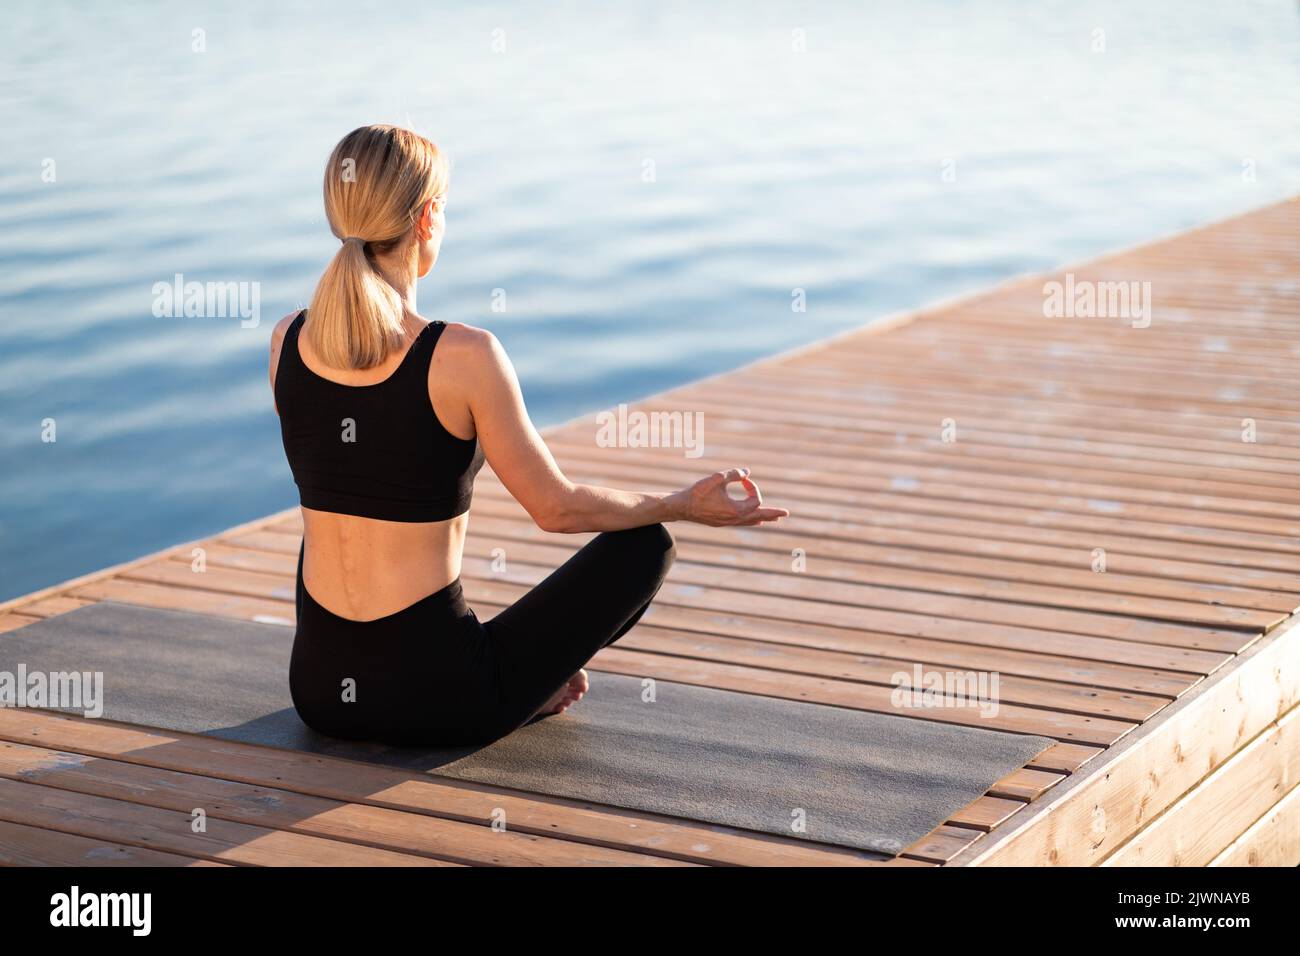 Morning Meditation. Calm Blond Woman Practicing Yoga Outdoors, Meditating In Lotus Position Stock Photo